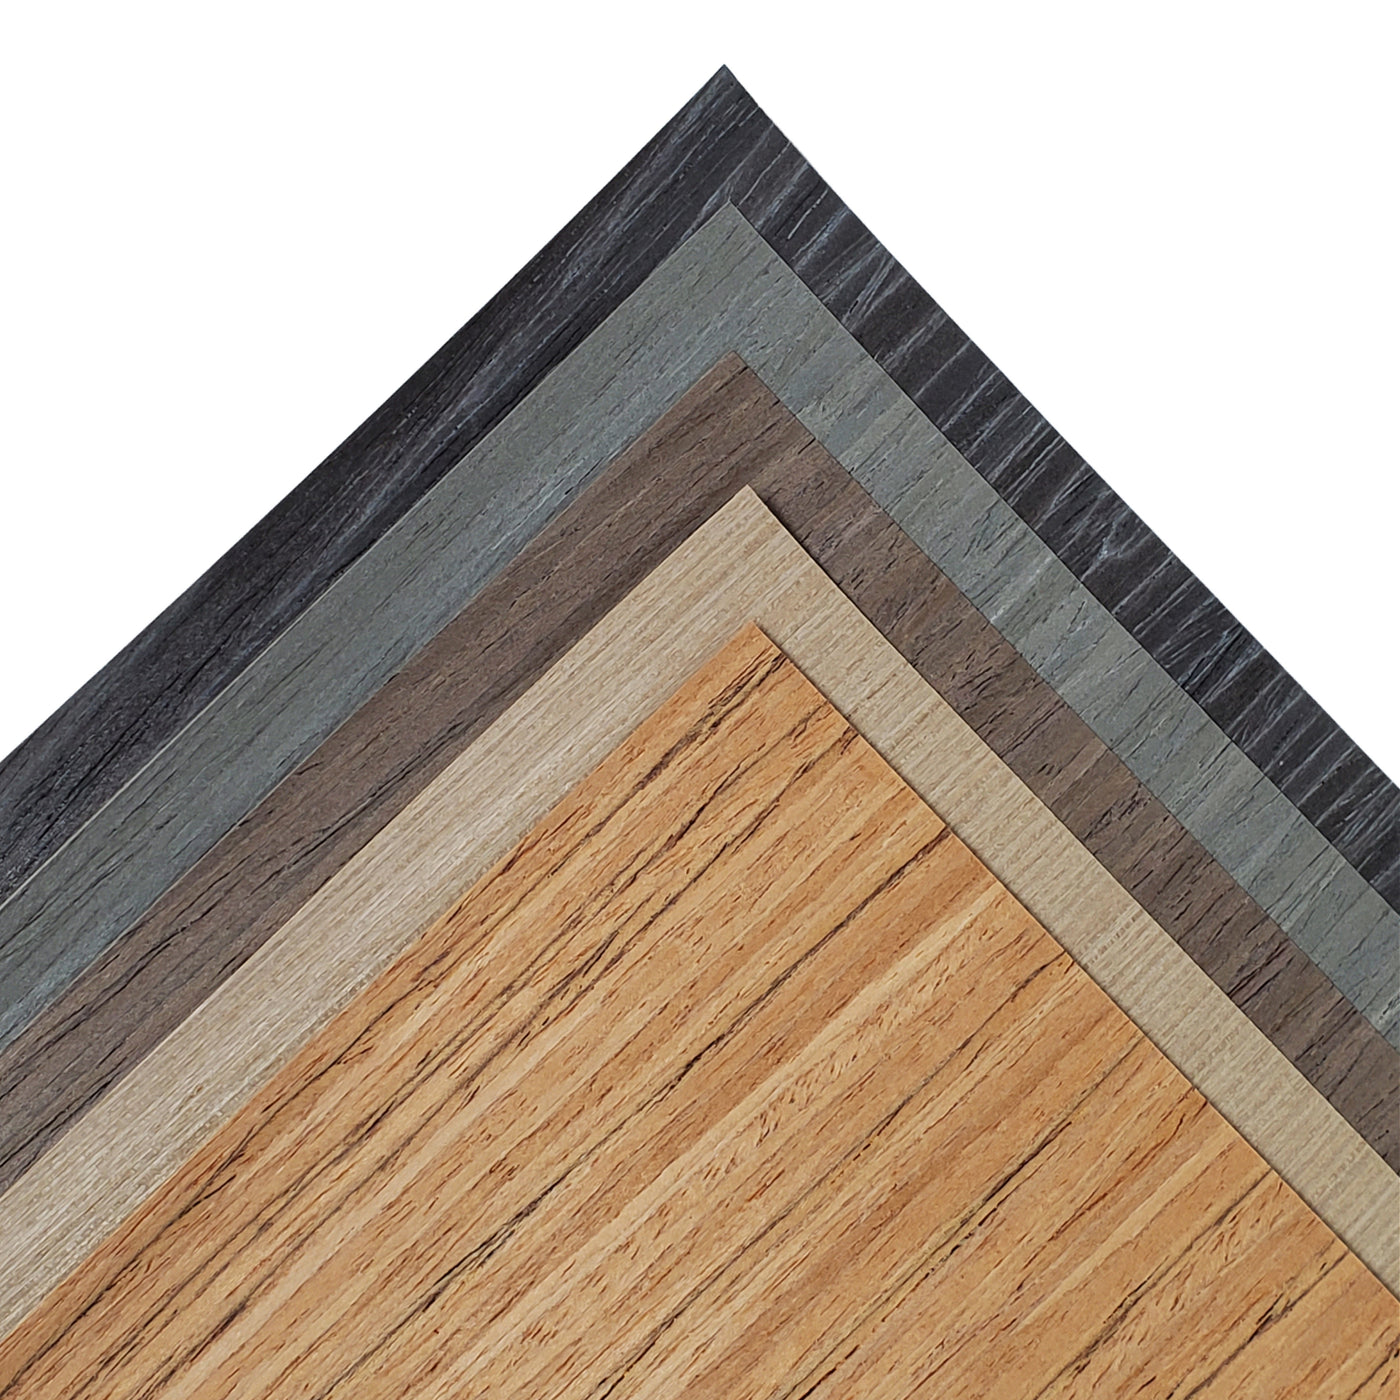 The assortment pack includes one each of five neutral colored Balsa wood grain textured cardstock from American Crafts, acid-free 12x12 cardstock.